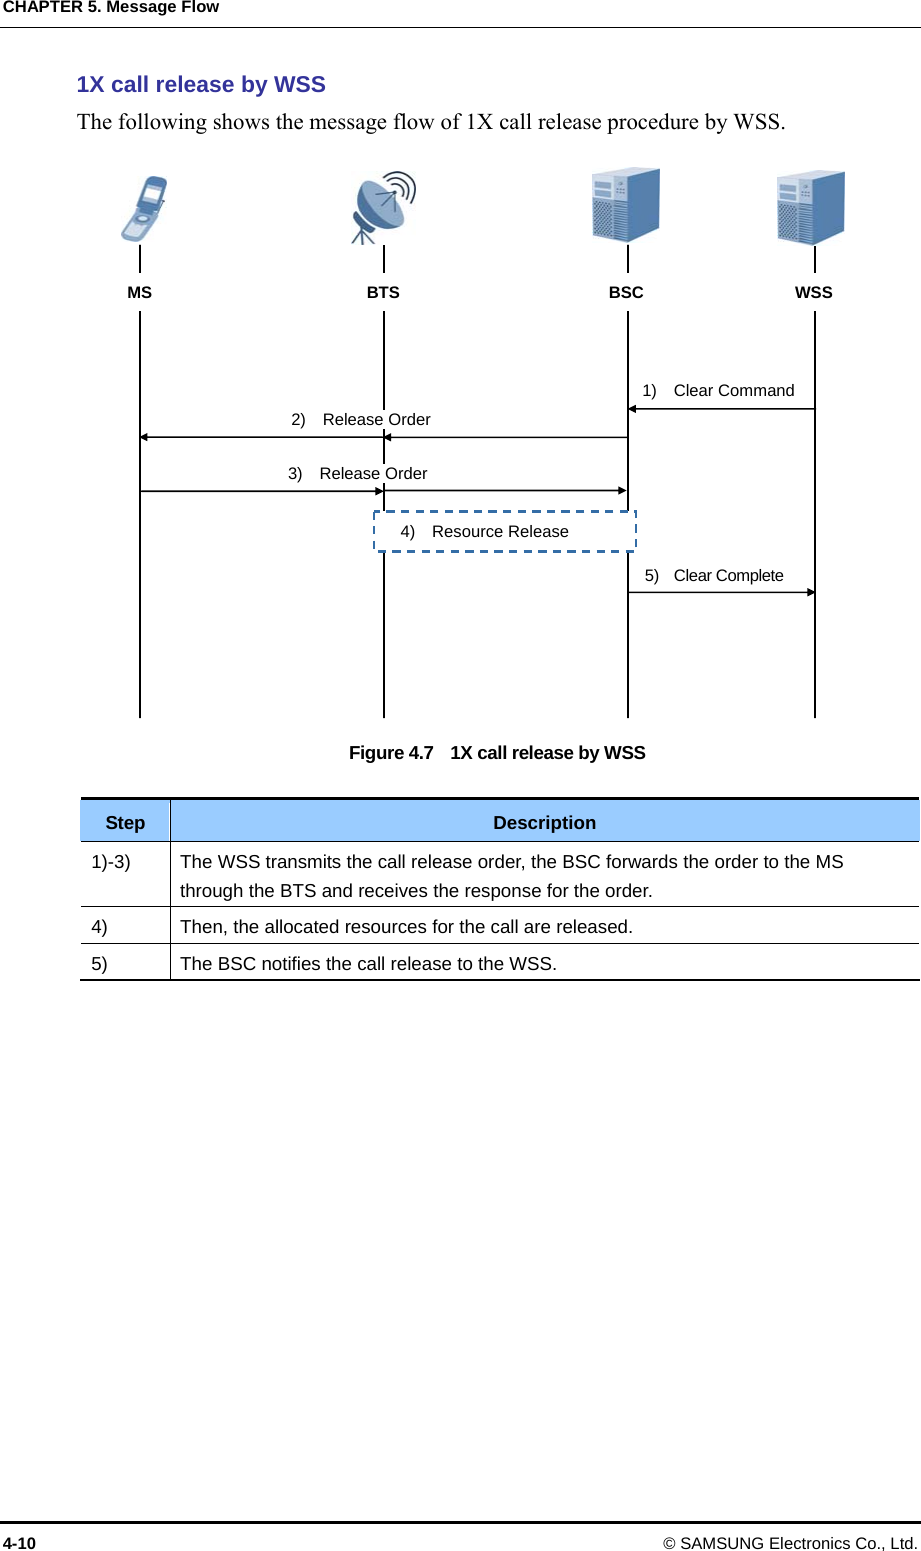 CHAPTER 5. Message Flow 4-10 © SAMSUNG Electronics Co., Ltd. 1X call release by WSS The following shows the message flow of 1X call release procedure by WSS.  Figure 4.7    1X call release by WSS  Step  Description 1)-3)  The WSS transmits the call release order, the BSC forwards the order to the MS through the BTS and receives the response for the order. 4)  Then, the allocated resources for the call are released. 5)  The BSC notifies the call release to the WSS.   MS  BTS BSC  WSS 3)  Release Order 4)  Resource Release 1)  Clear Command 5)  Clear Complete 2)  Release Order 